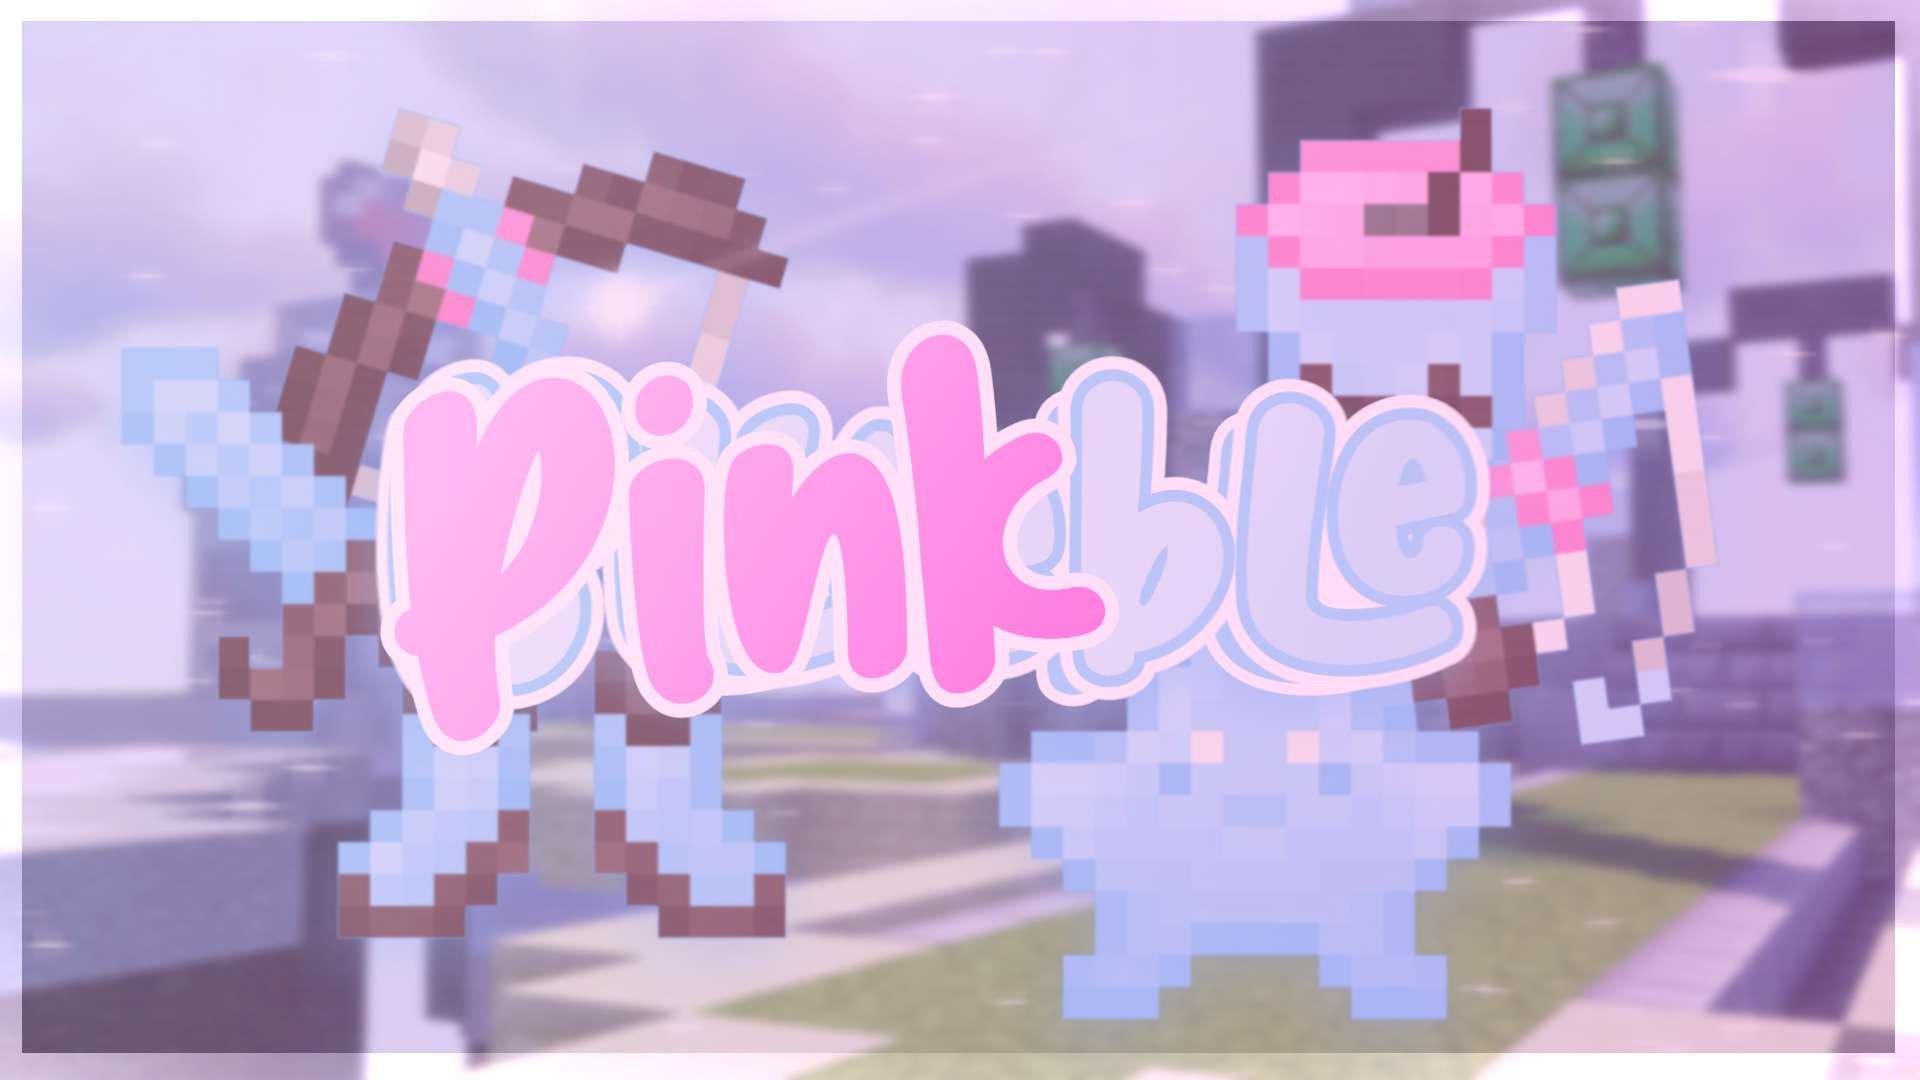 Pinkble 16 by Juuliet on PvPRP